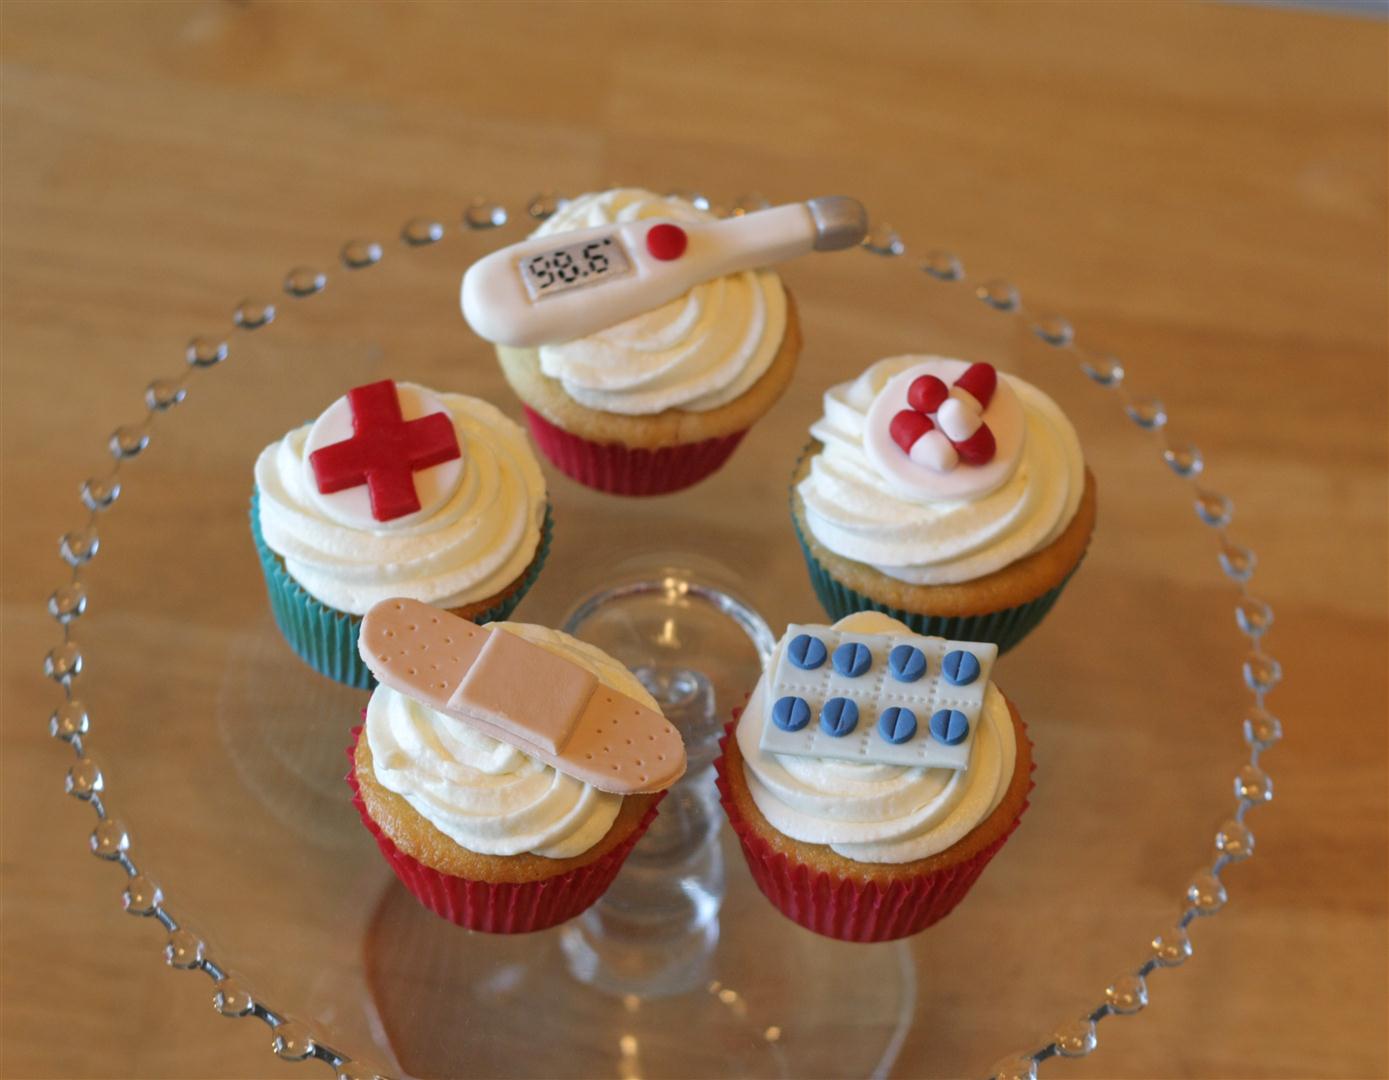 day may keep the doctor away, but with doctor-inspired cupcakes ...